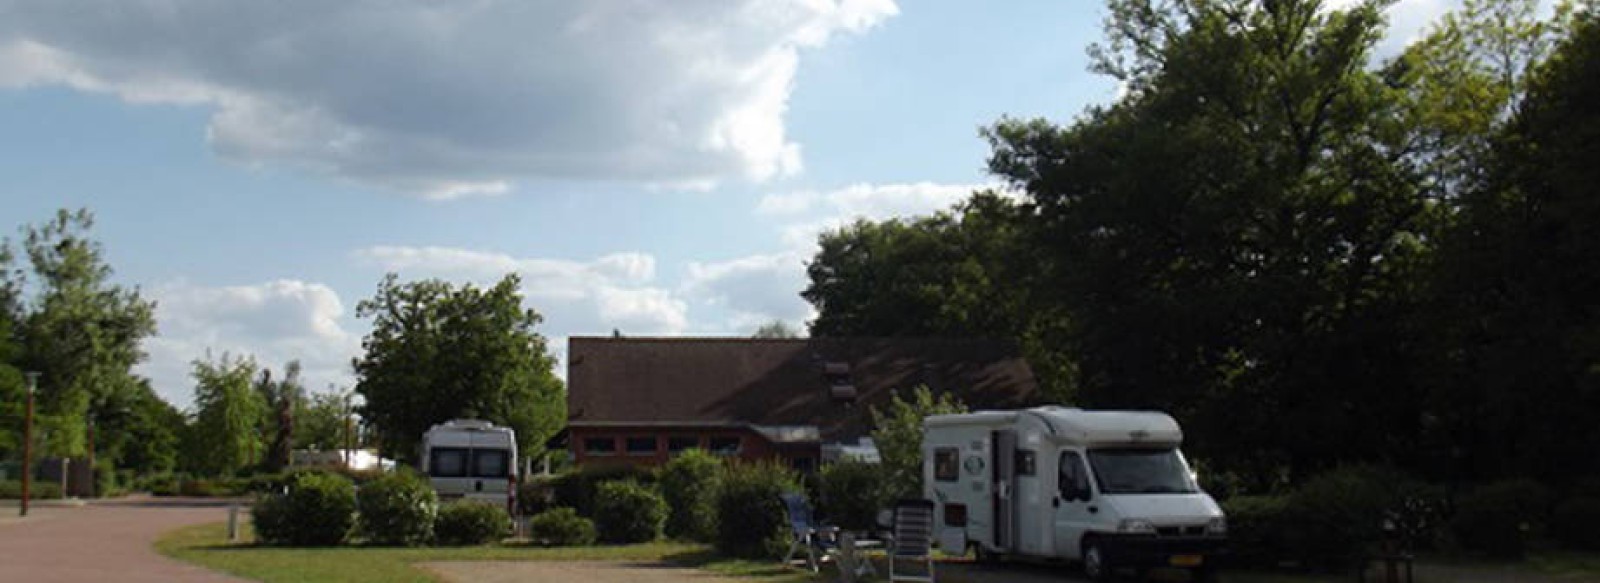 Aire de services camping-cars - Camping OnlyCamp Le Pont Romain